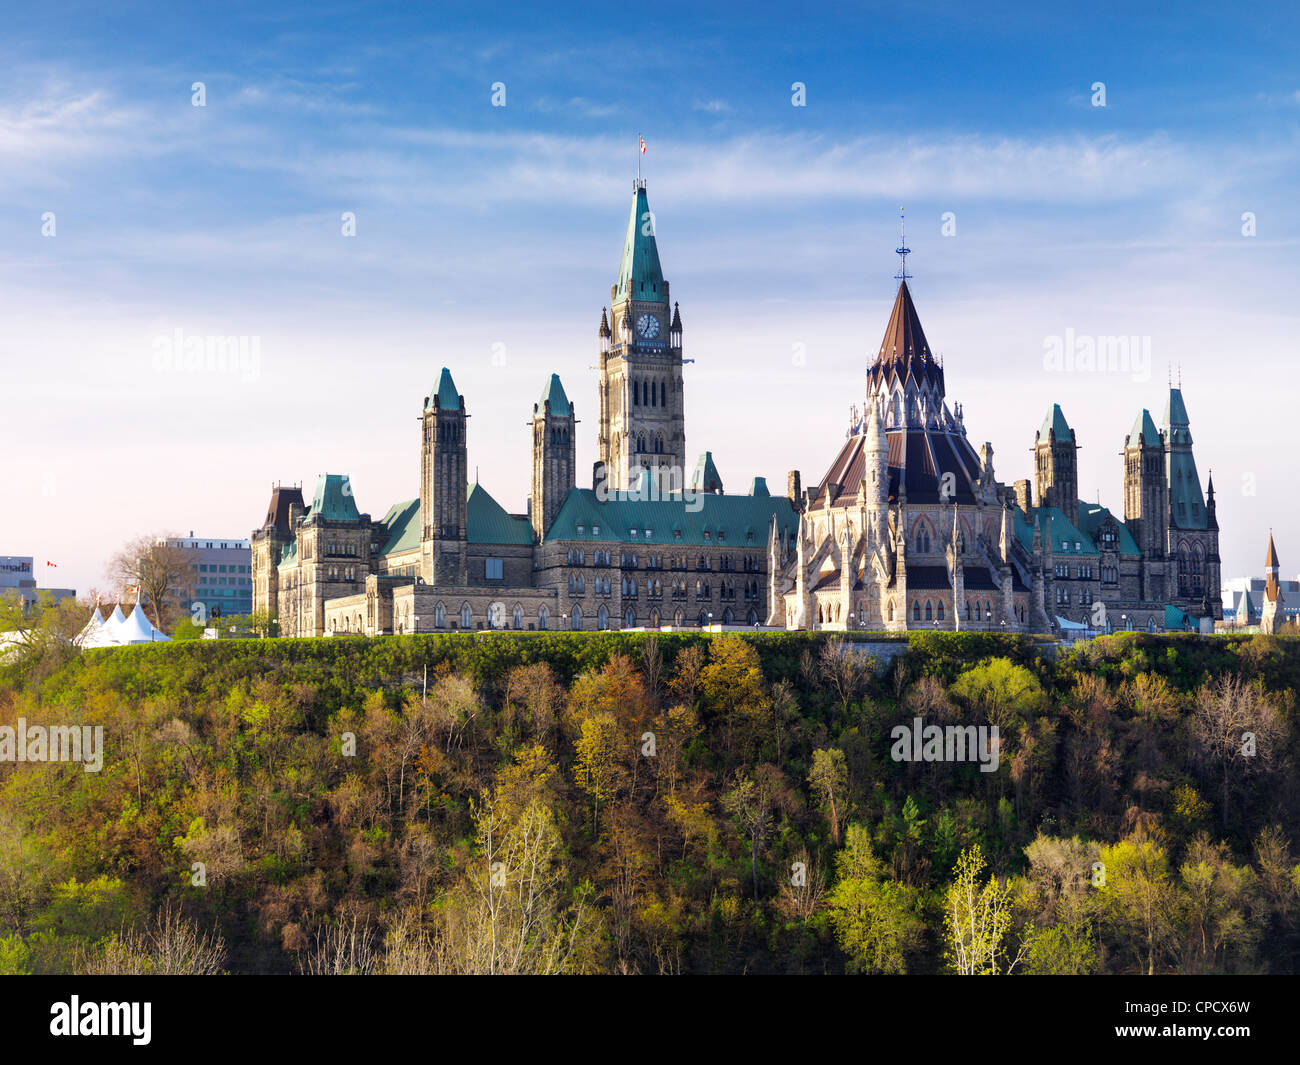 The Parliament Building in Ottawa, Ontario, Canada springtime scenic May 2012 Stock Photo